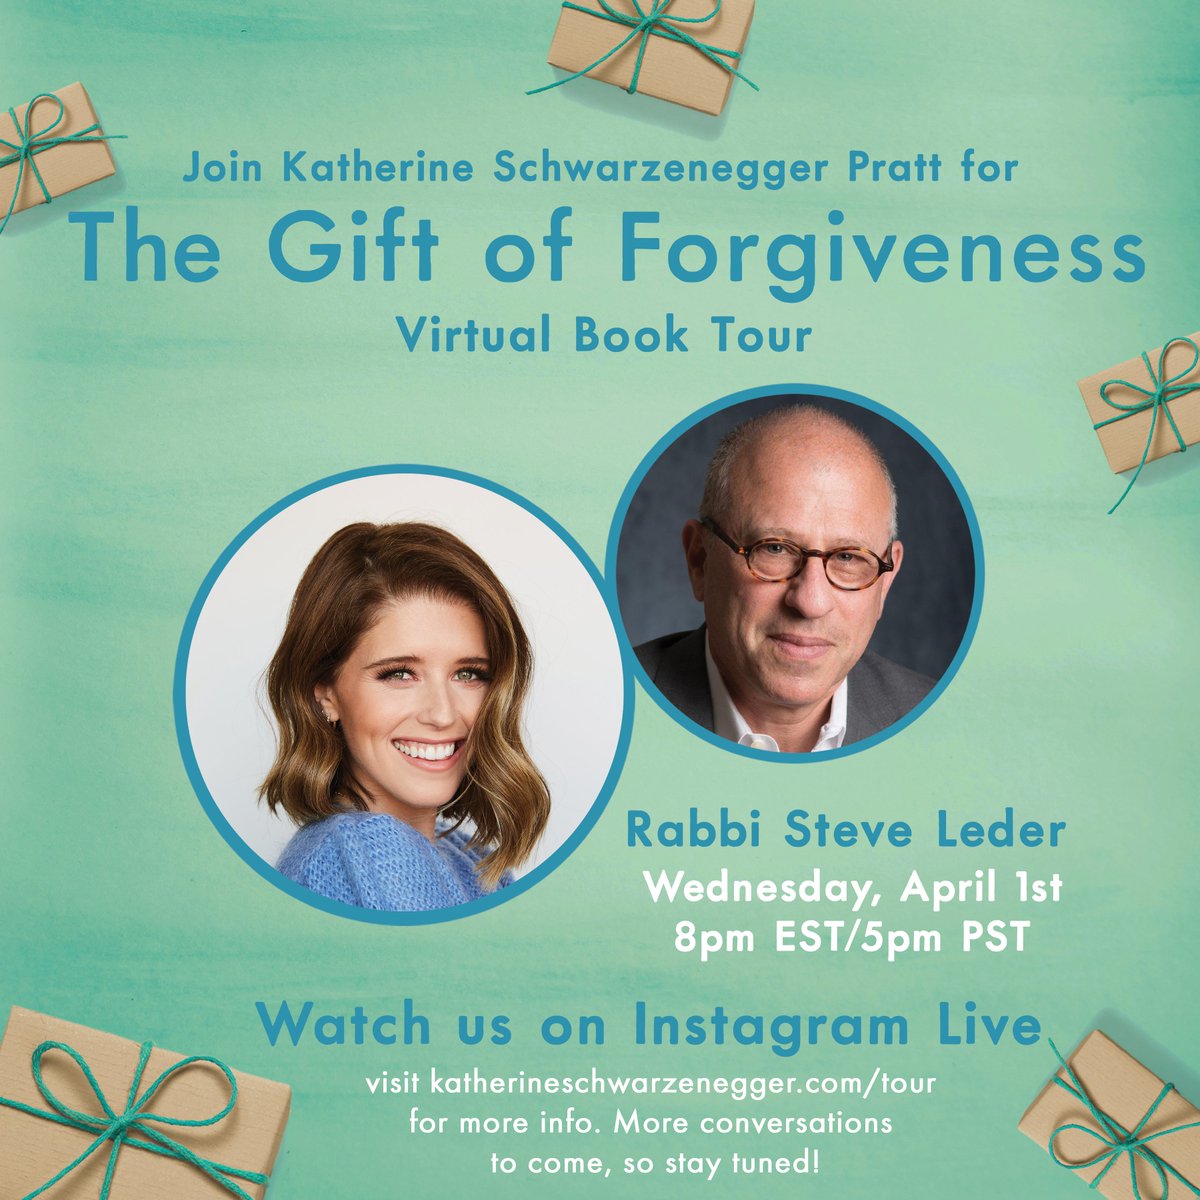 Steve Leder on Twitter: "Please join me today for an Instagram chat with Katherine Schwarzenegger. We're going to talk about "The Gift of Forgiveness” at 8pm EST/ 5pm PST. https://t.co/N4EWyrUxnY" /